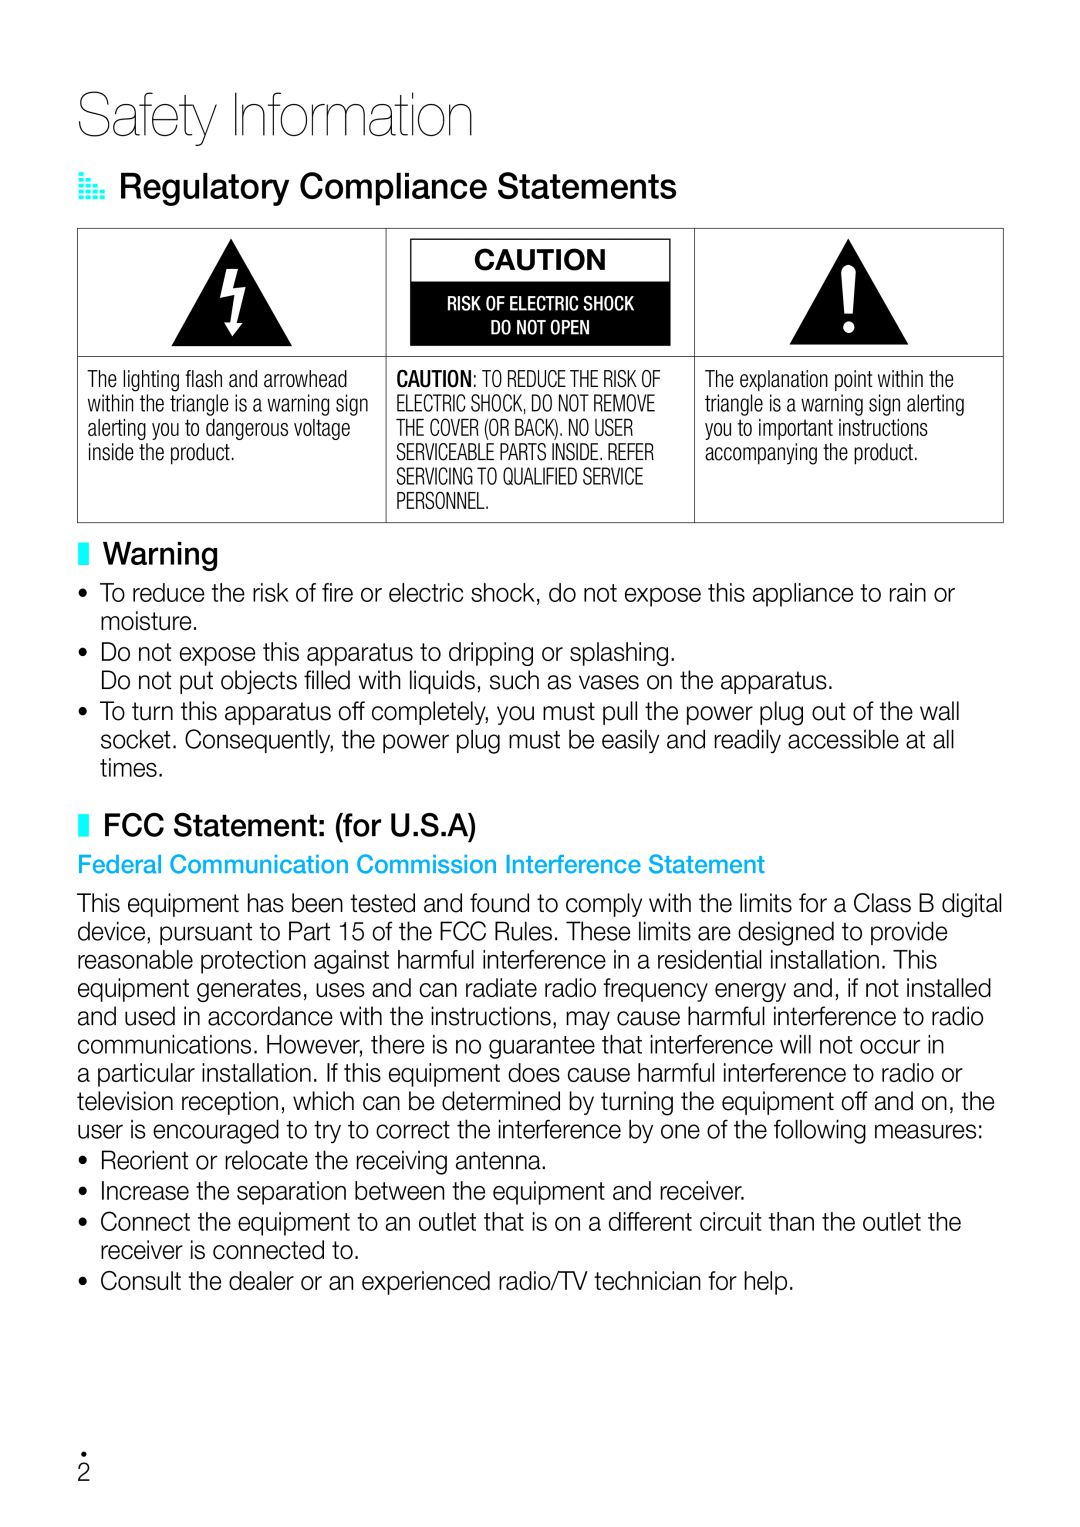 Samsung WAM750 user manual Safety Information, AARegulatory Compliance Statements, FCC Statement: for U.S.A 